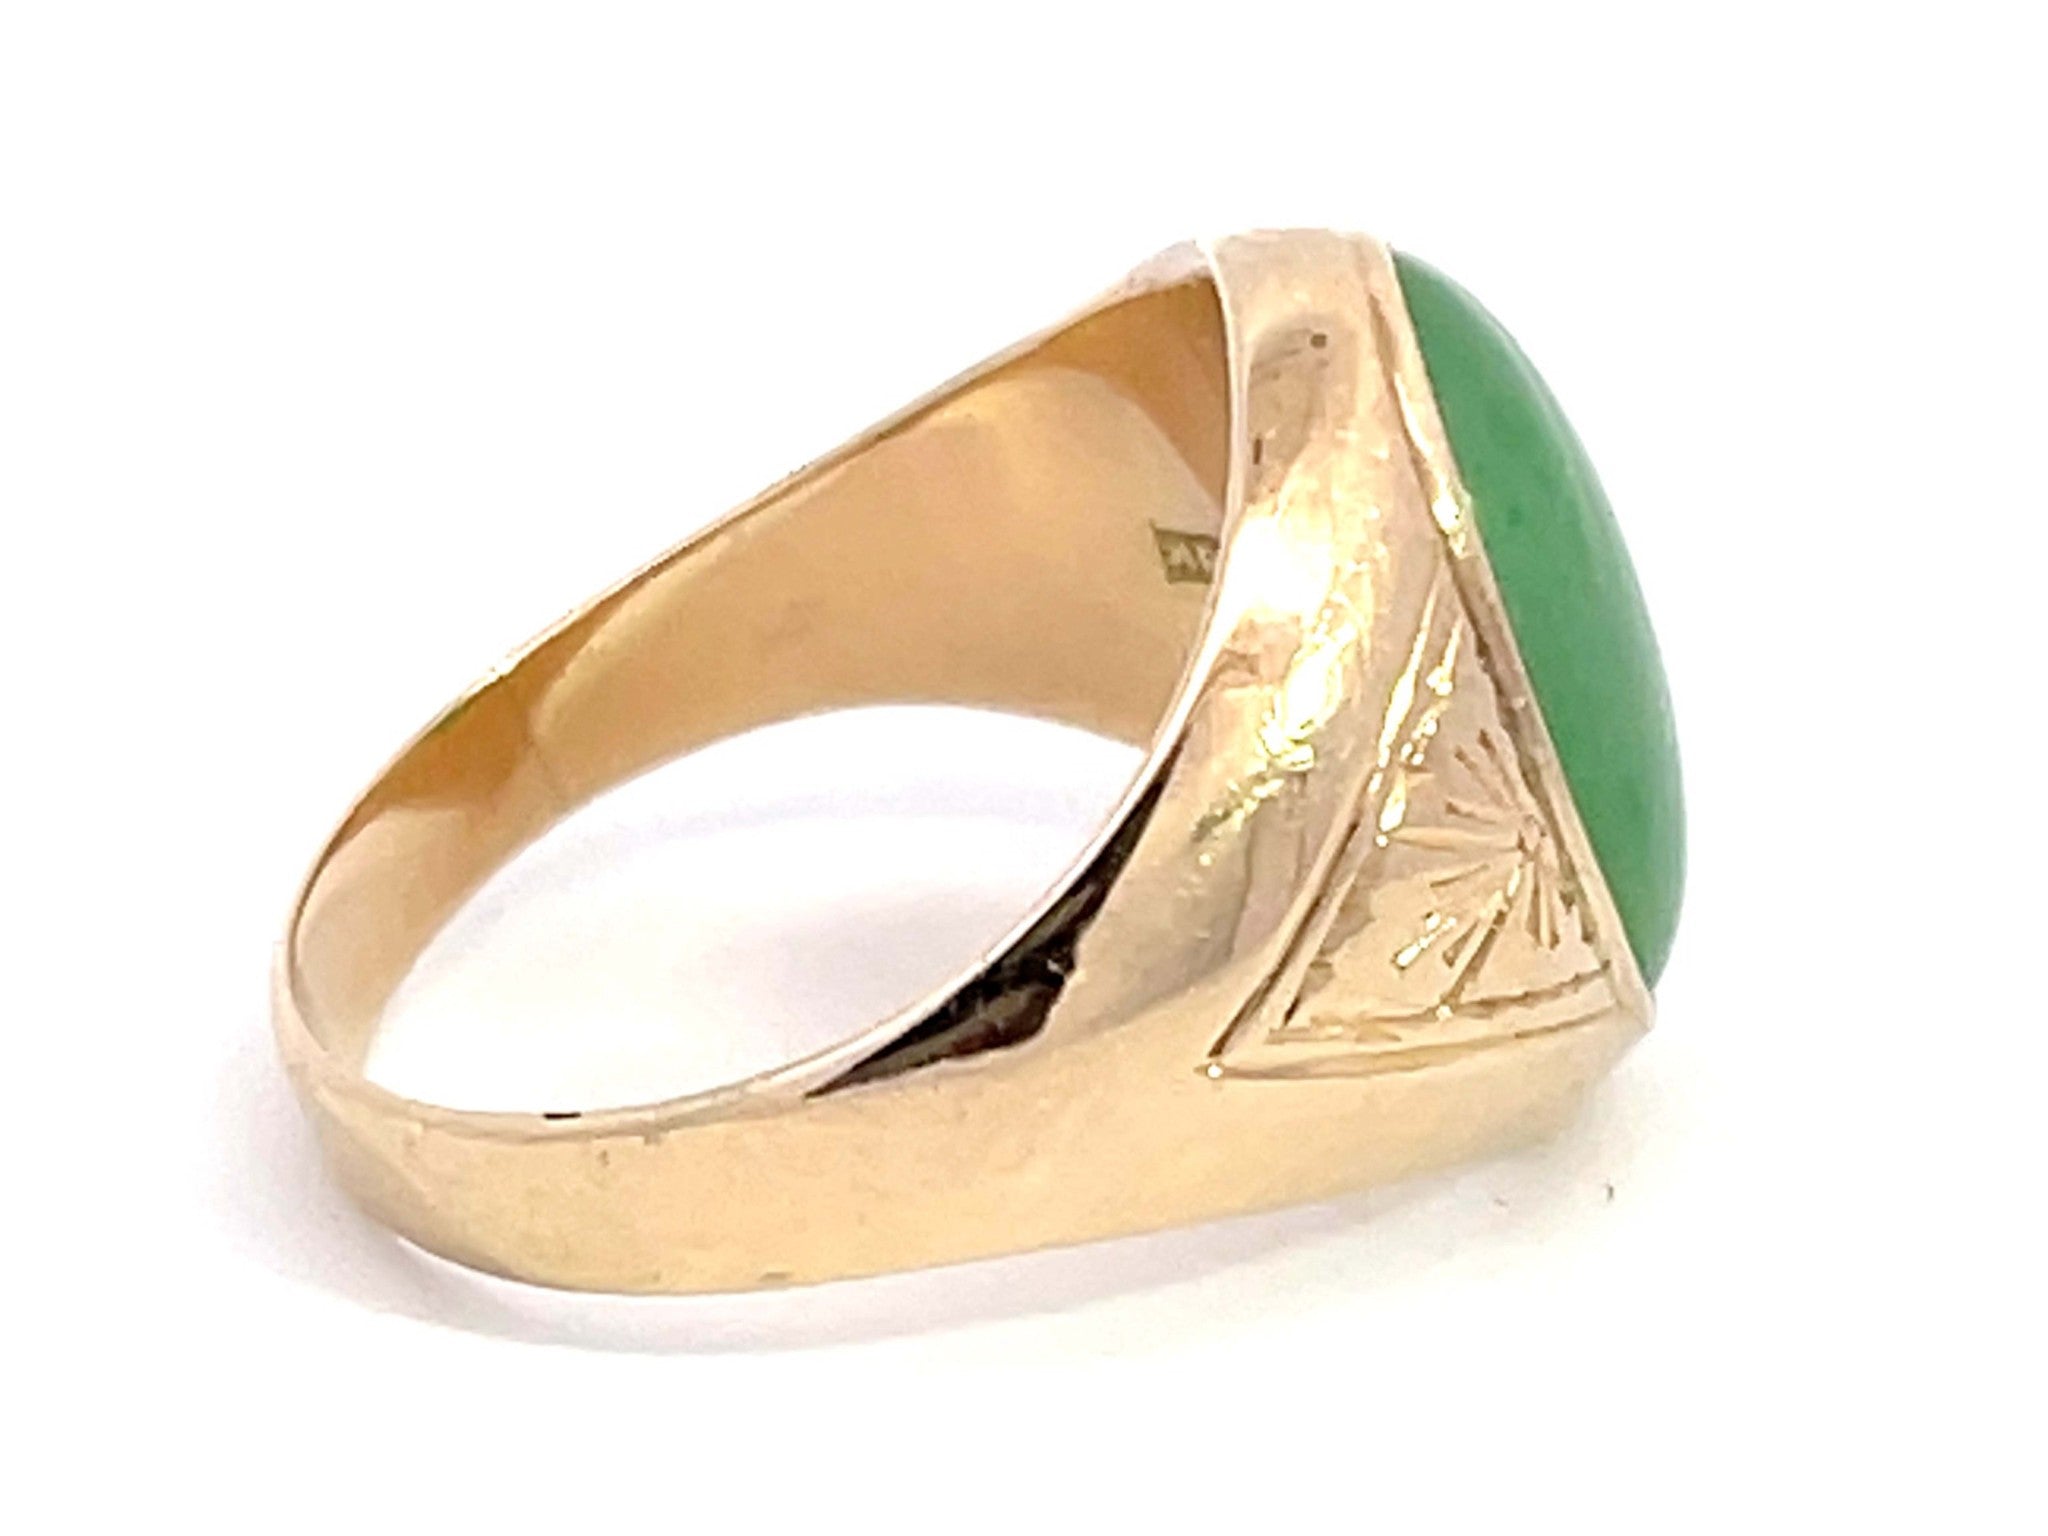 Oval Cabochon Green Jade Ring with Triangle Design Shoulders in 14K Yellow Gold